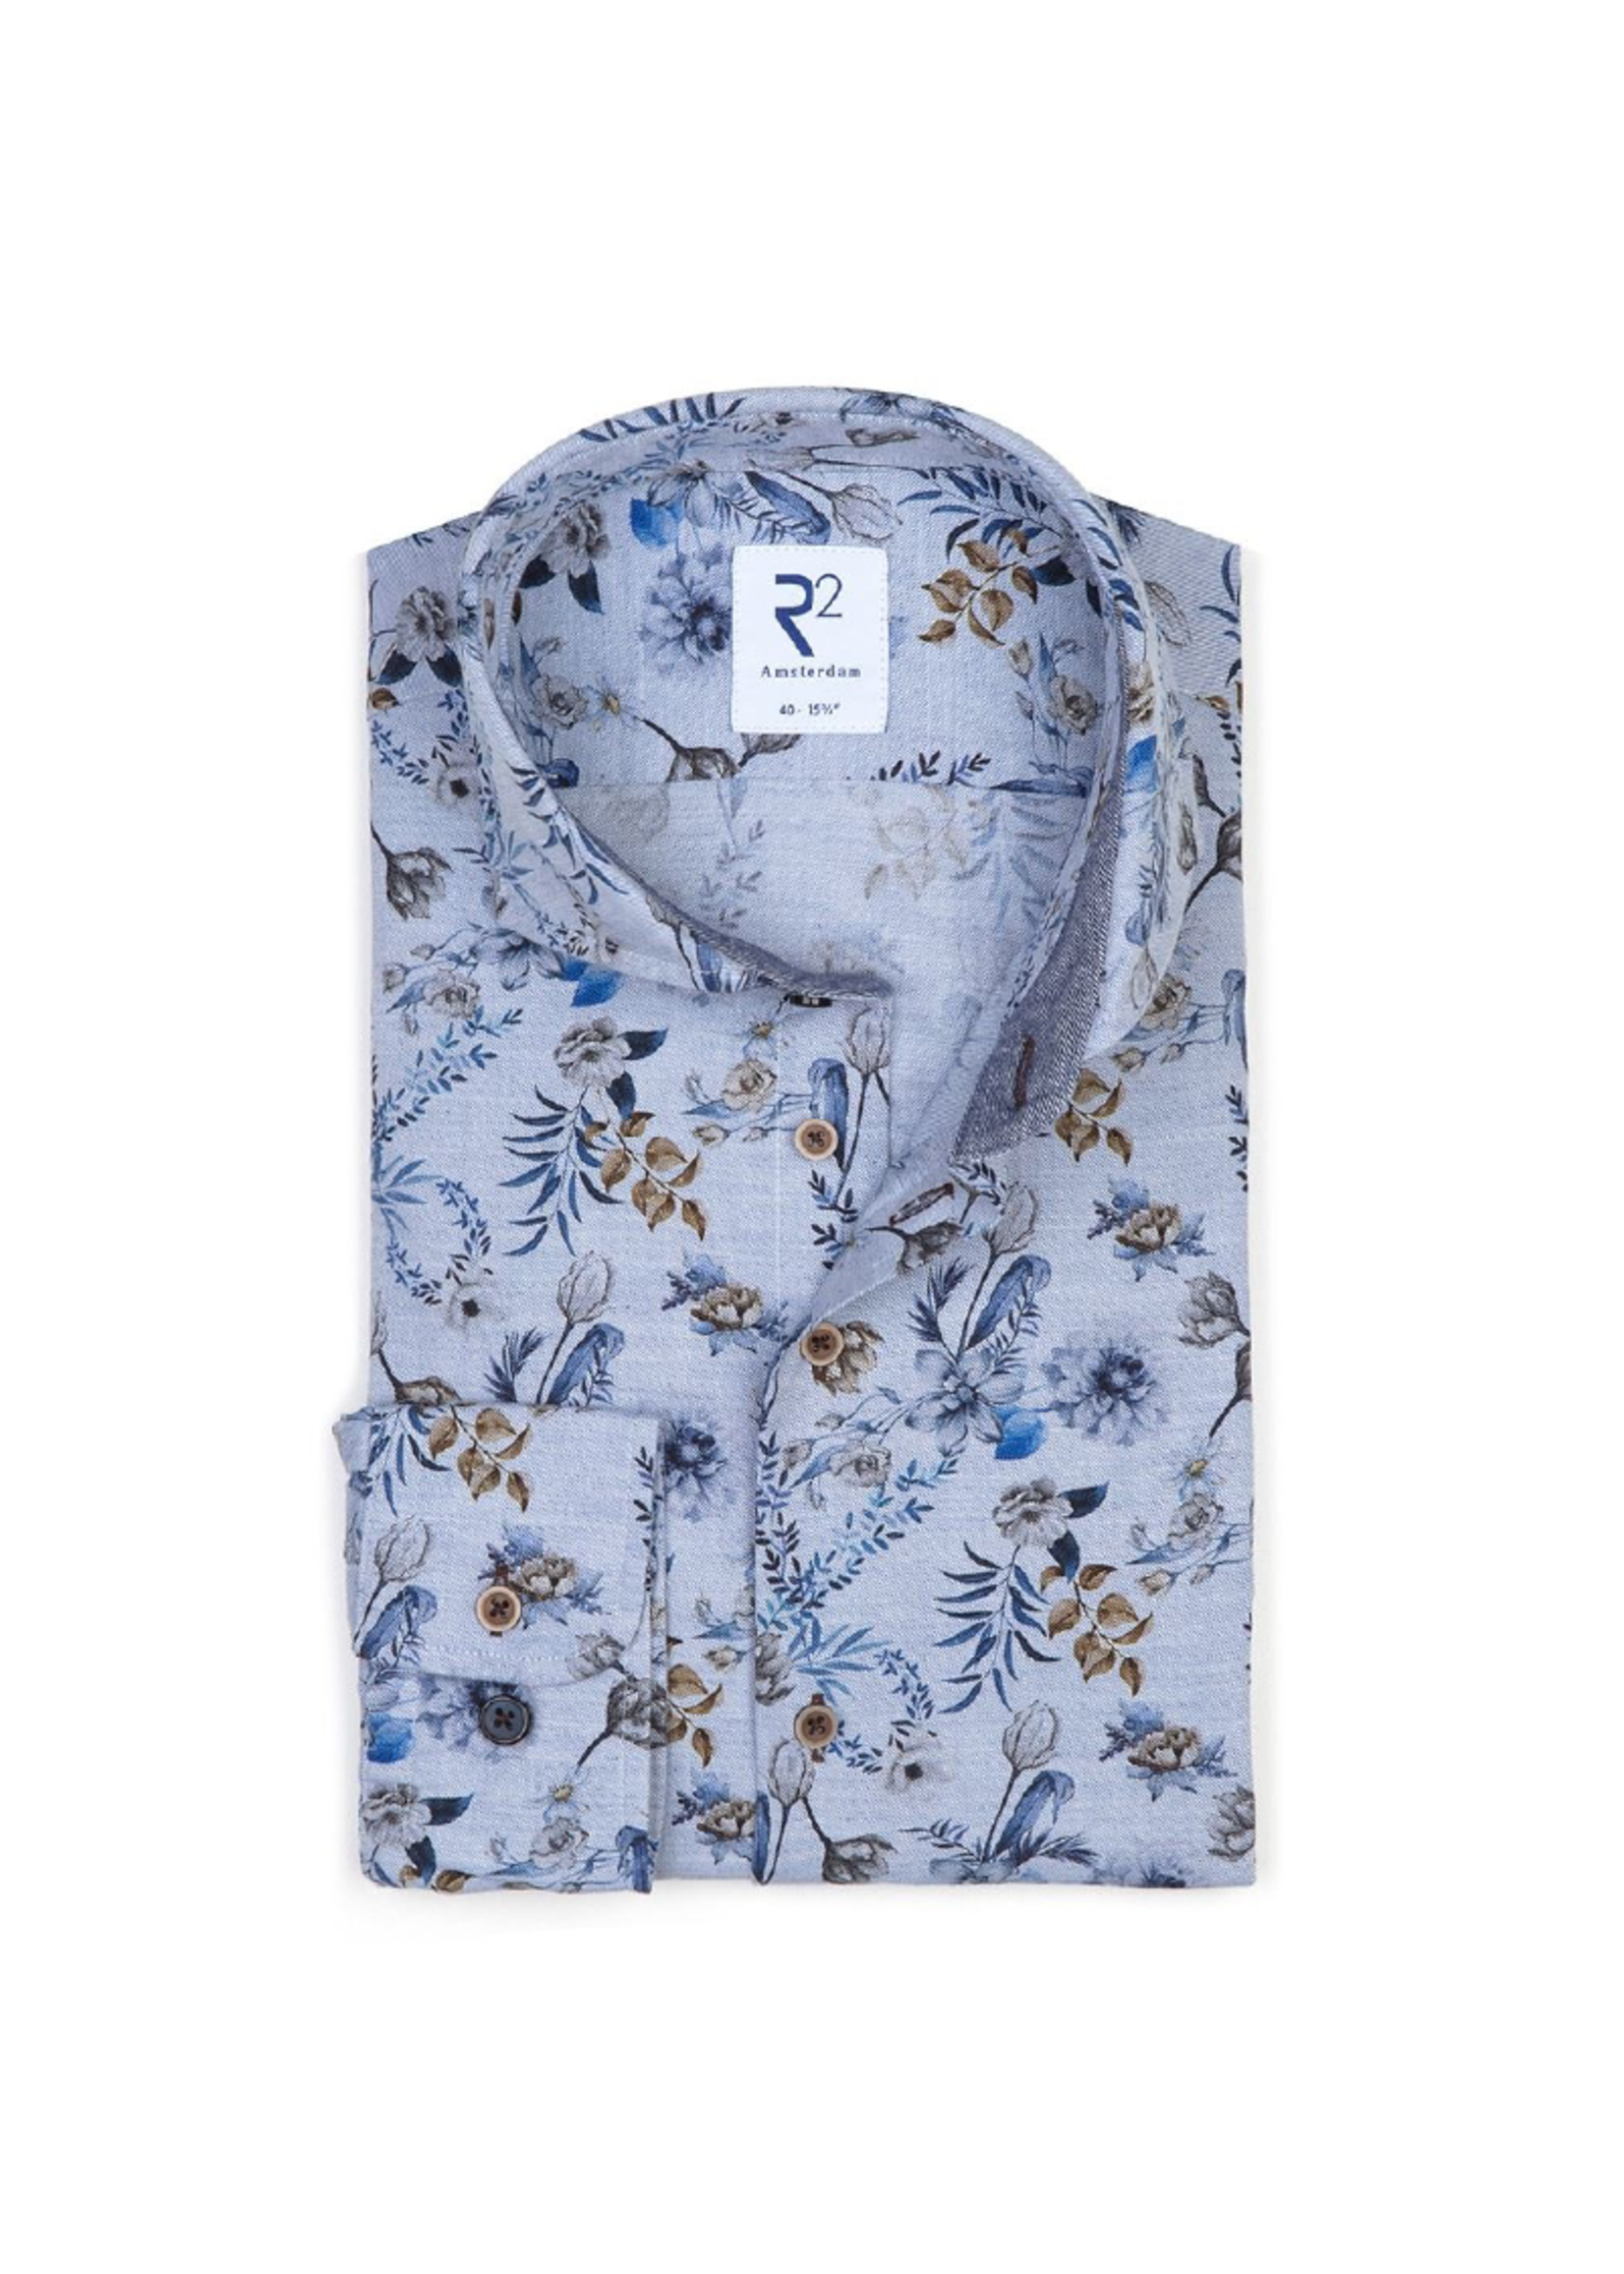 R2 Amsterdam Floral Long-Sleeve Button Up